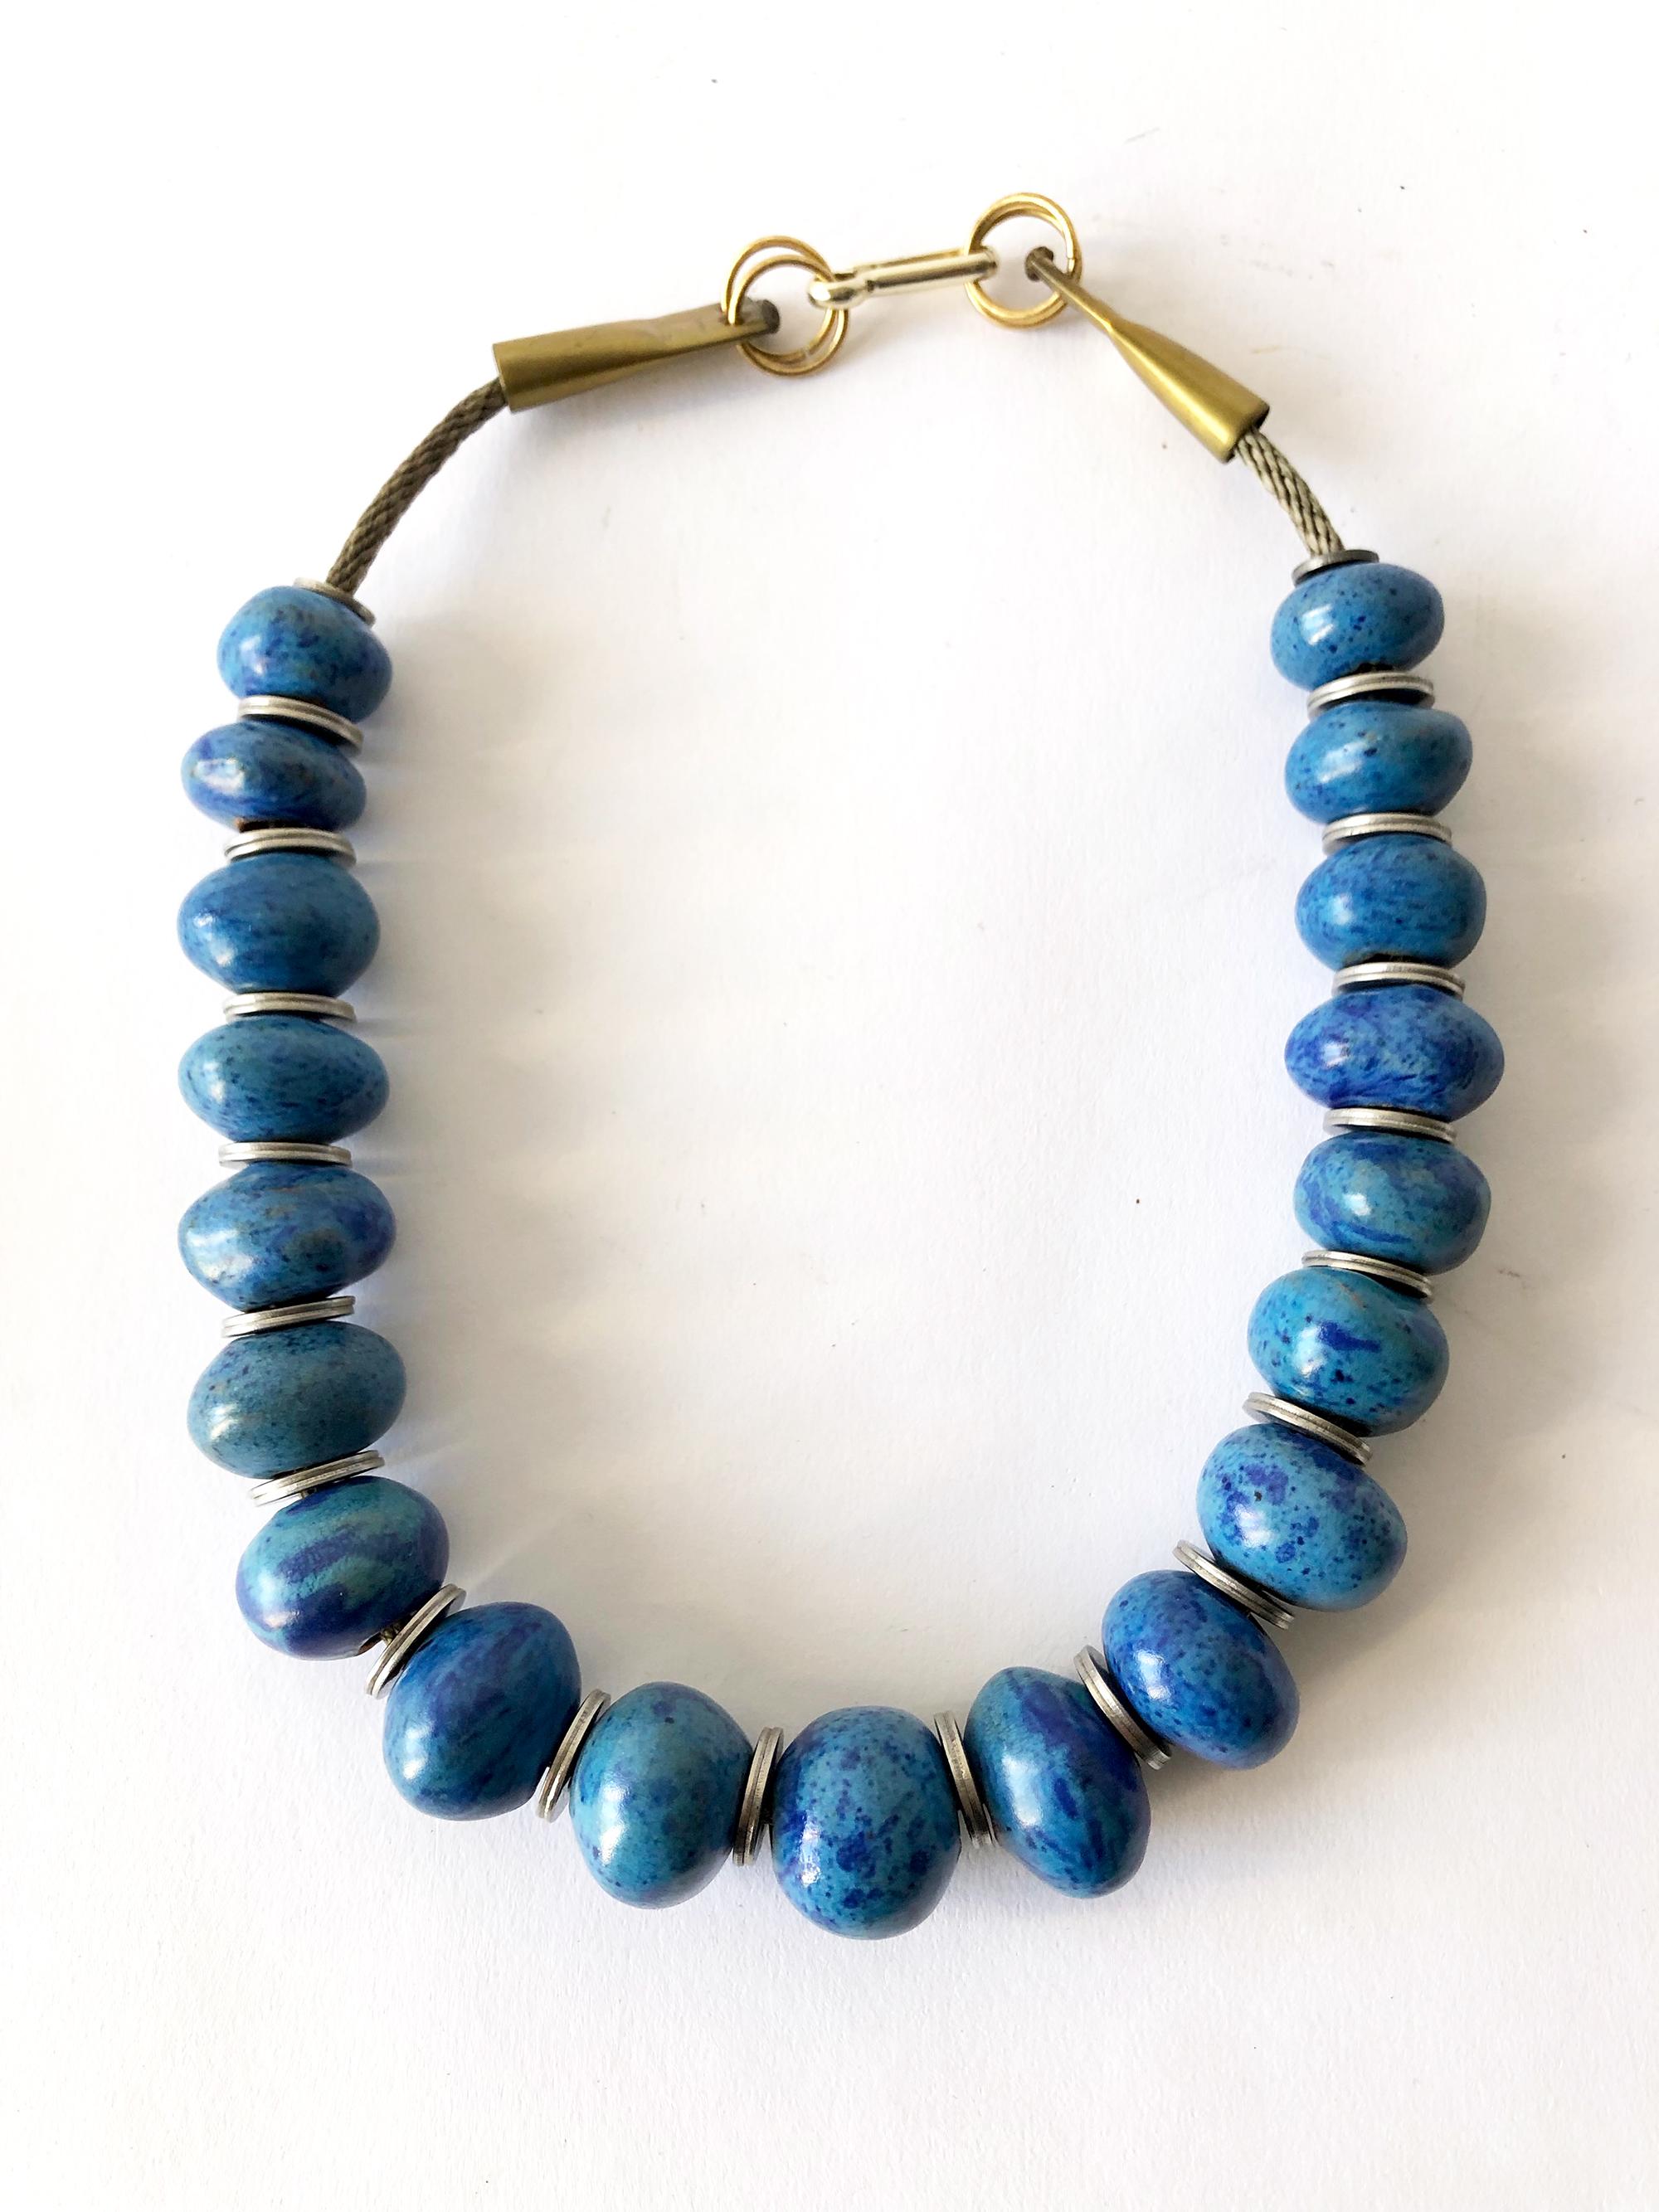 Handmade necklace of nineteen ovoid mottled turquoise beads separated by steel washers and strung on cable wire created by Doyle Lane of Los Angeles, California.  Necklace measures 22